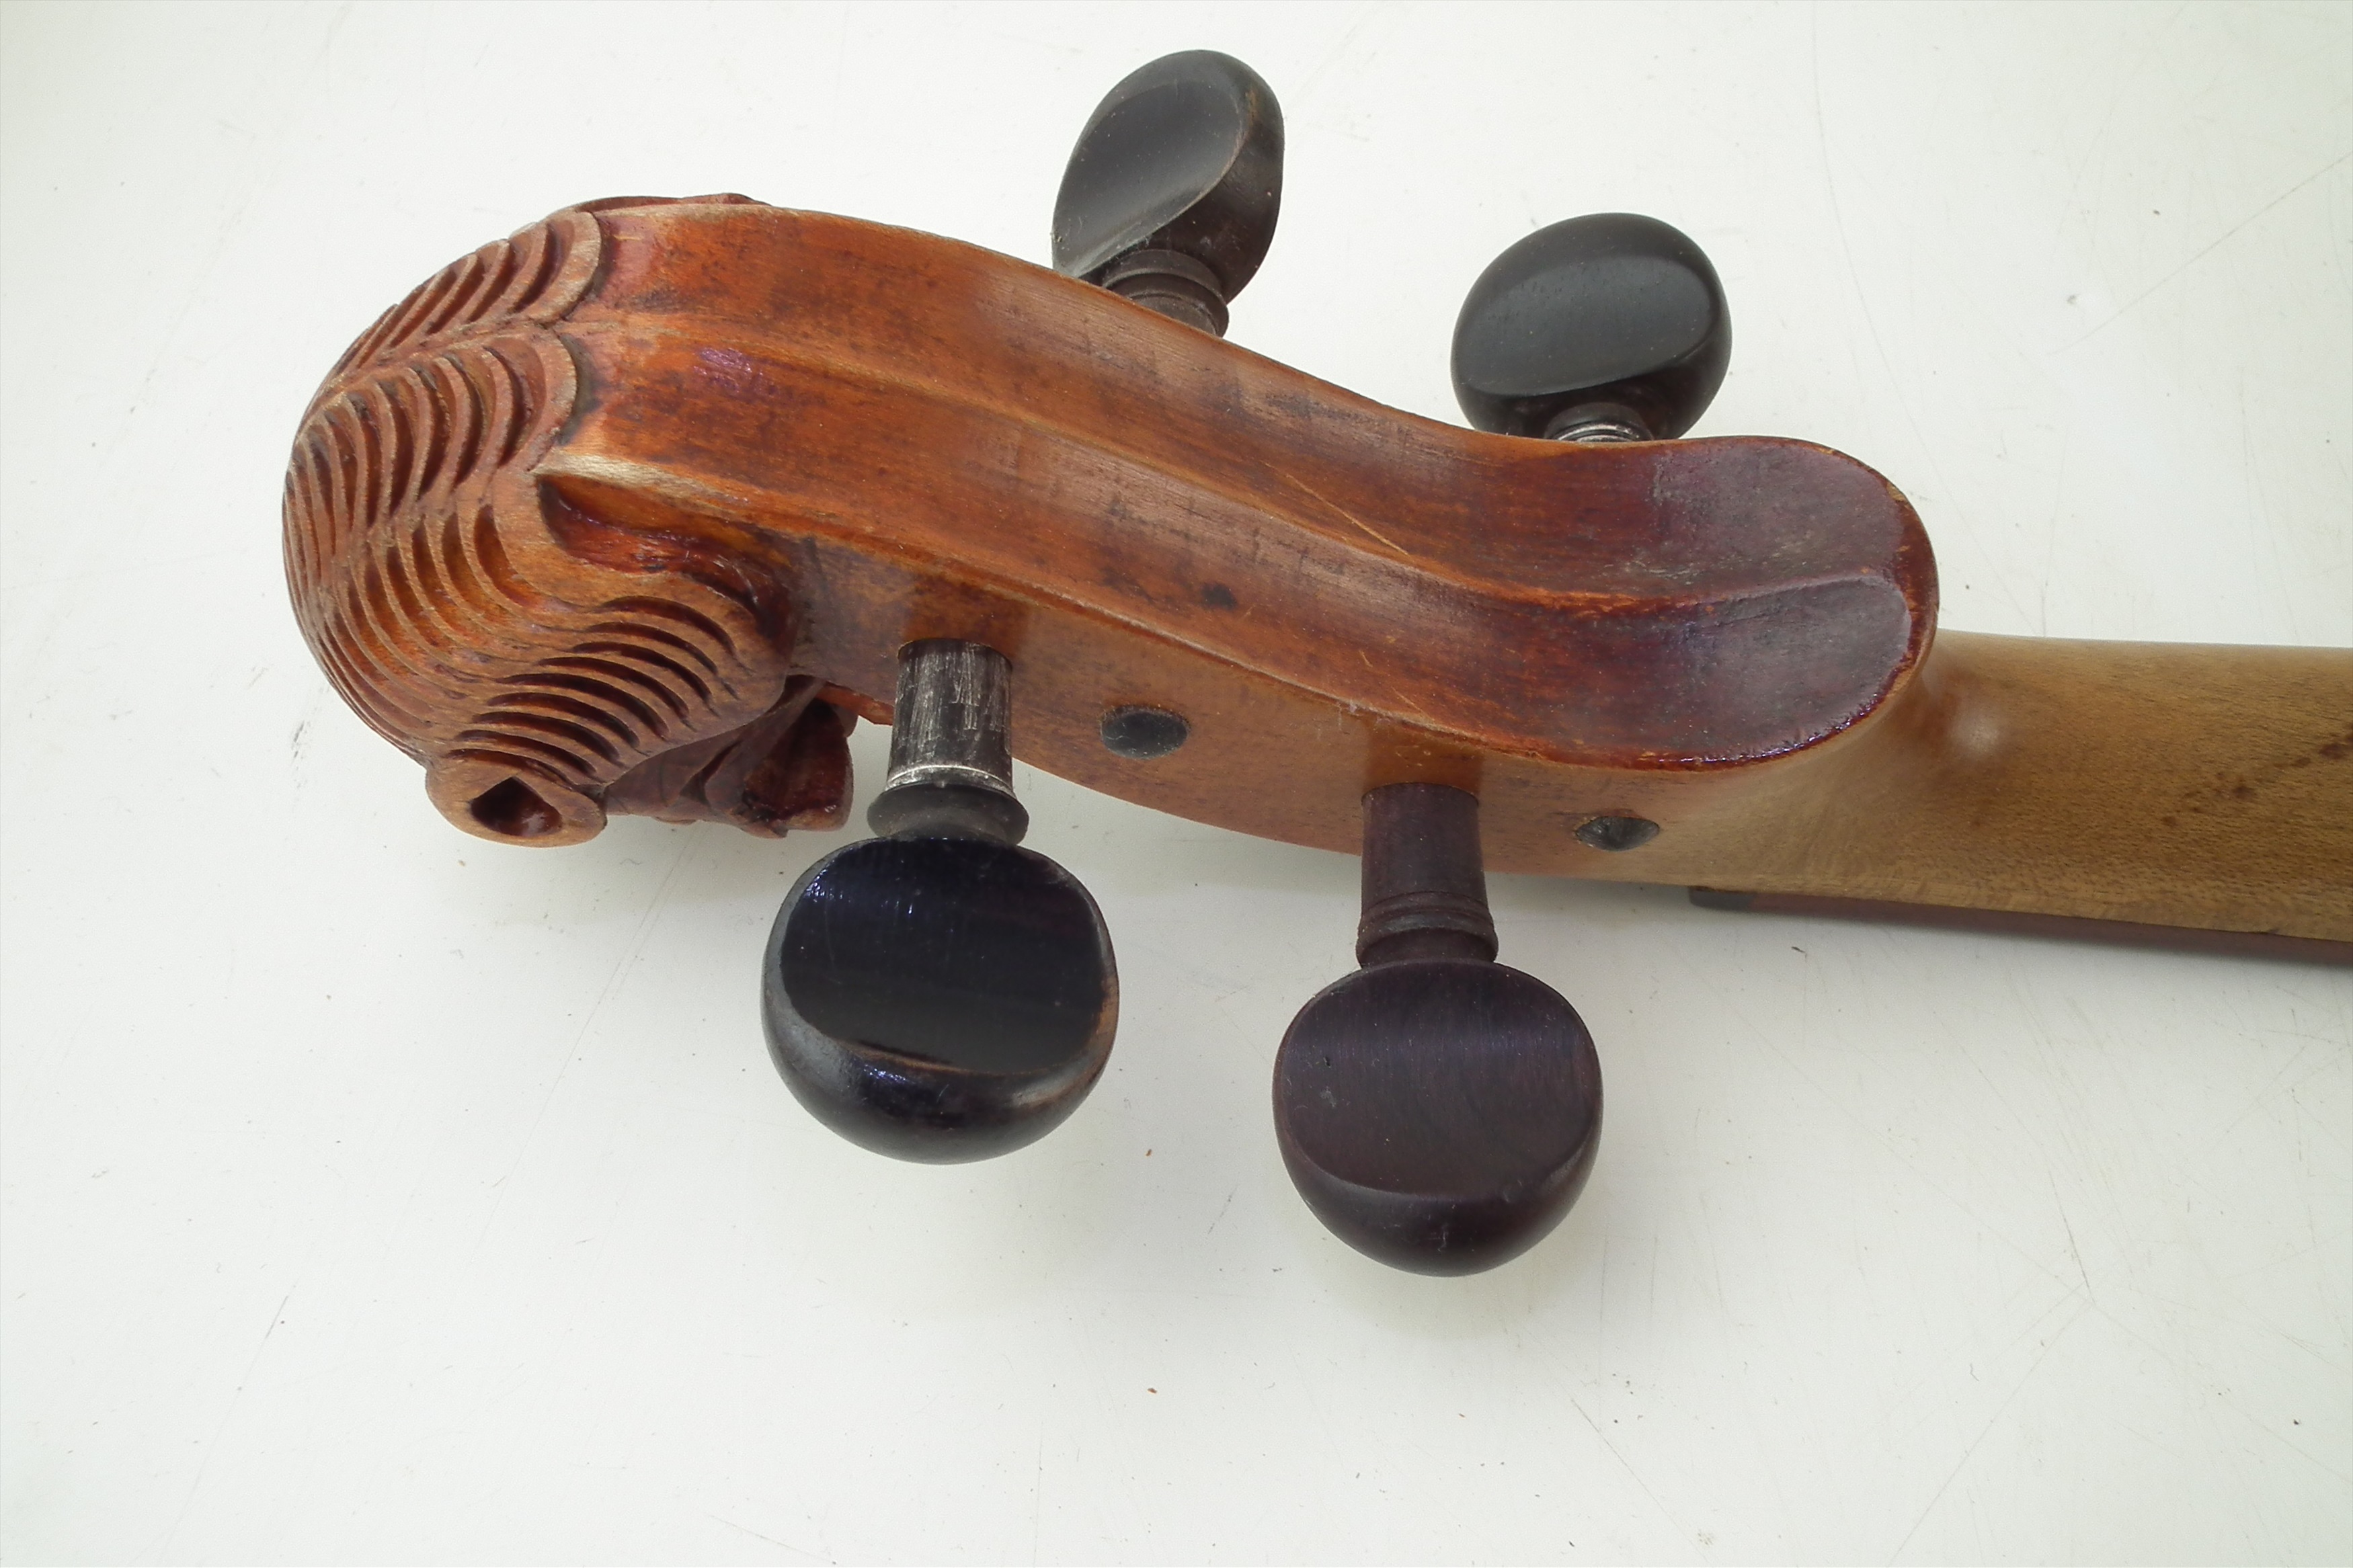 German lion head scroll violin together with one other violin, both with cases. - Image 8 of 14